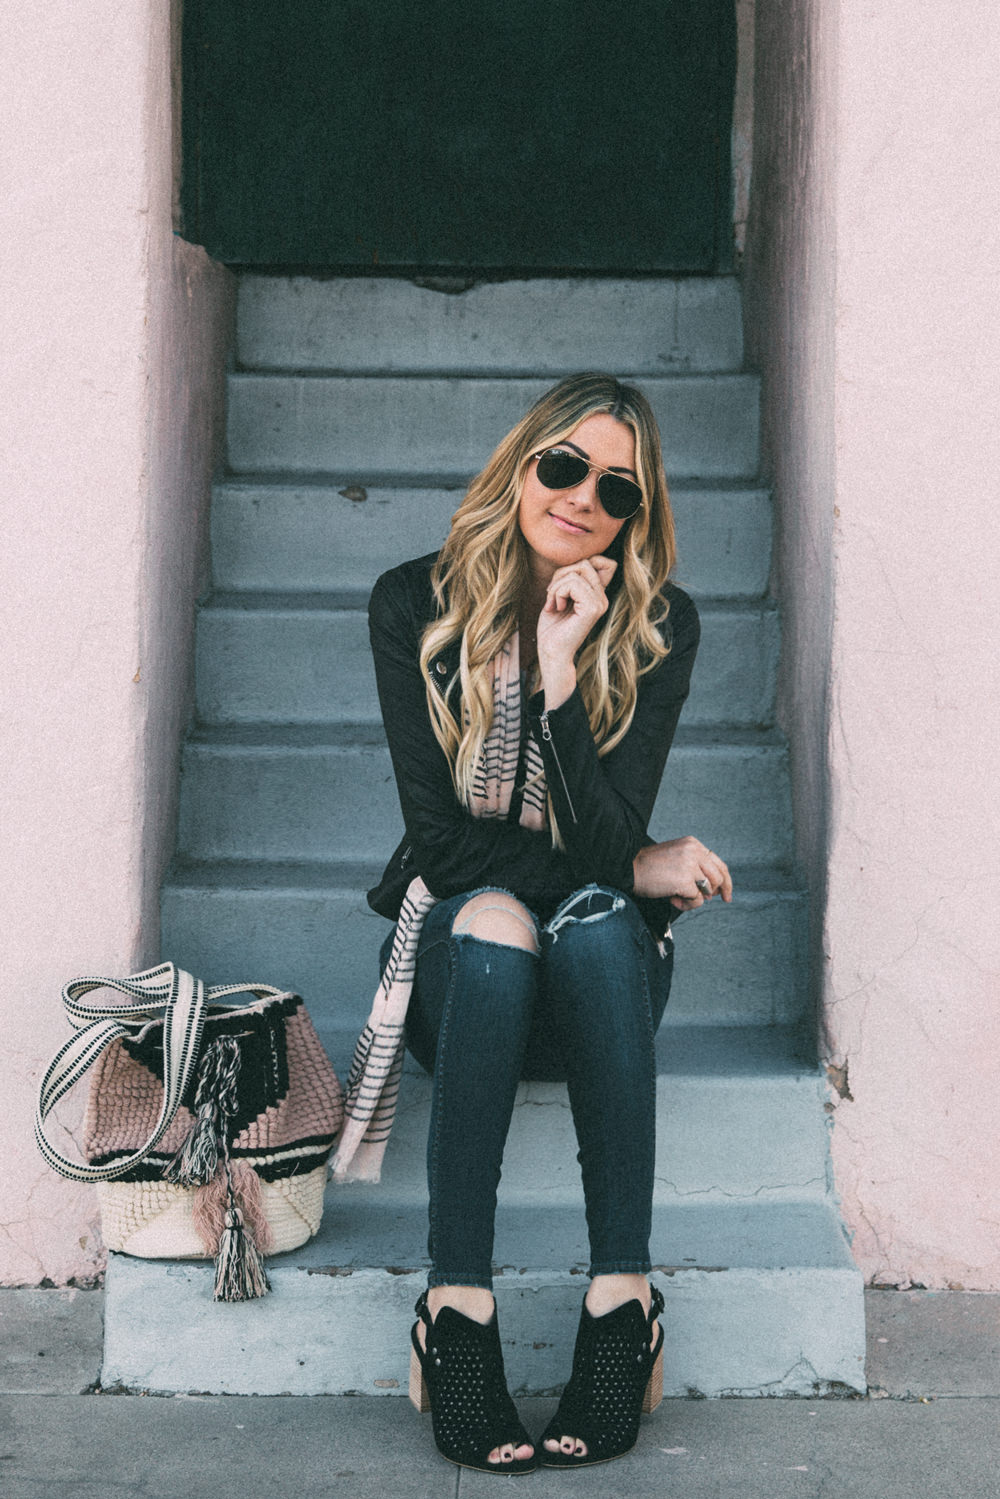 Dash of Darling shares a spring outfit wearing ripped denim with a bodysuit and pink stripe scarf and knit bag.